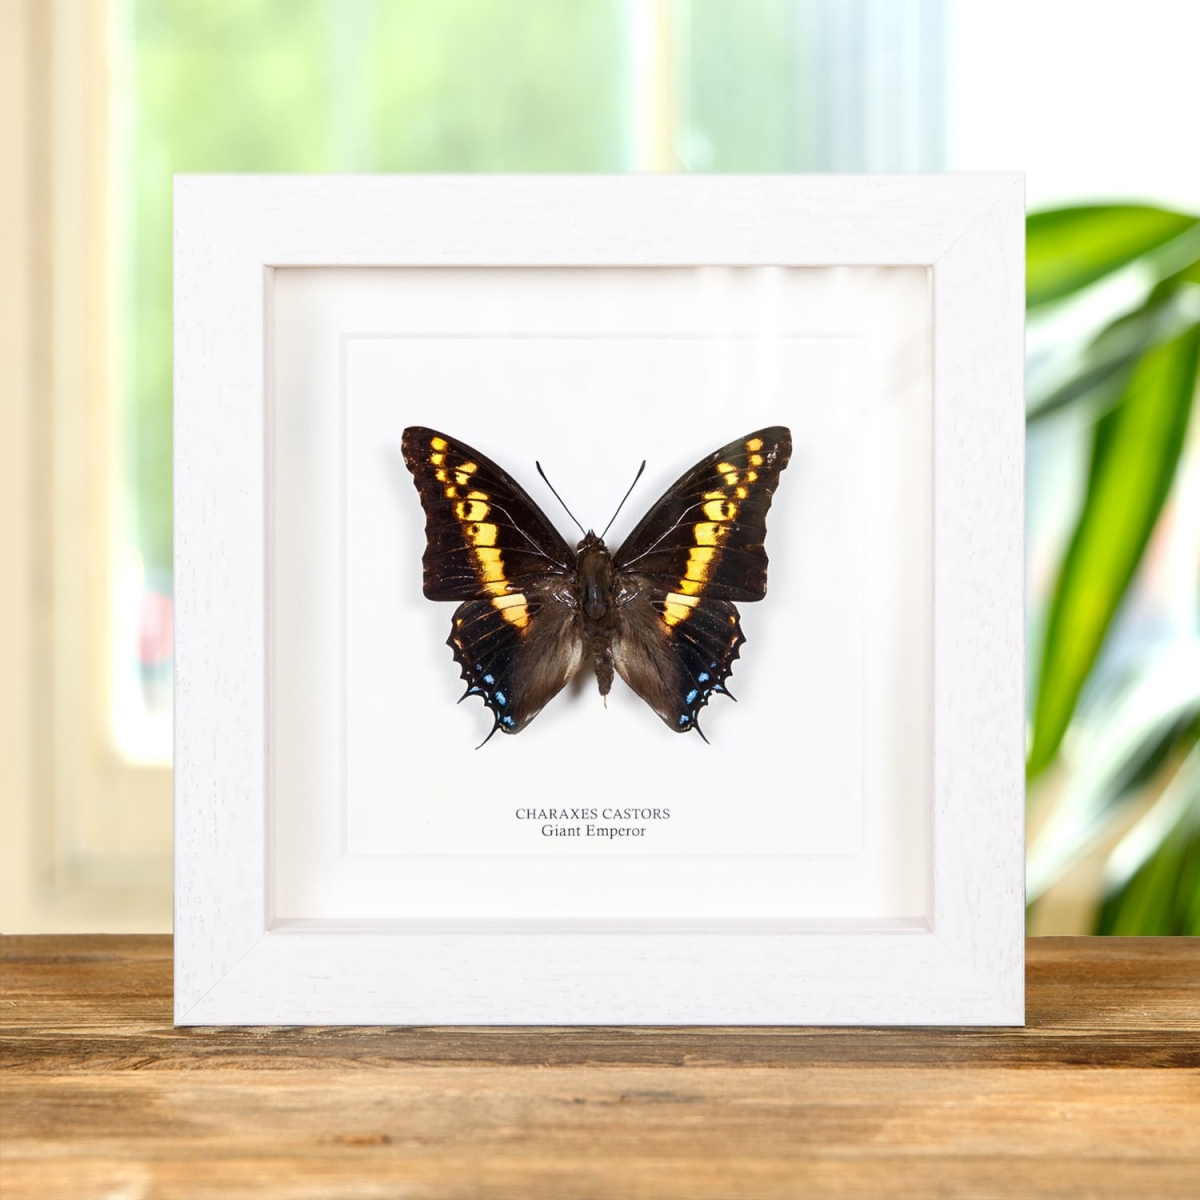 Giant Emperor Butterfly In Box Frame (Charaxes castors)